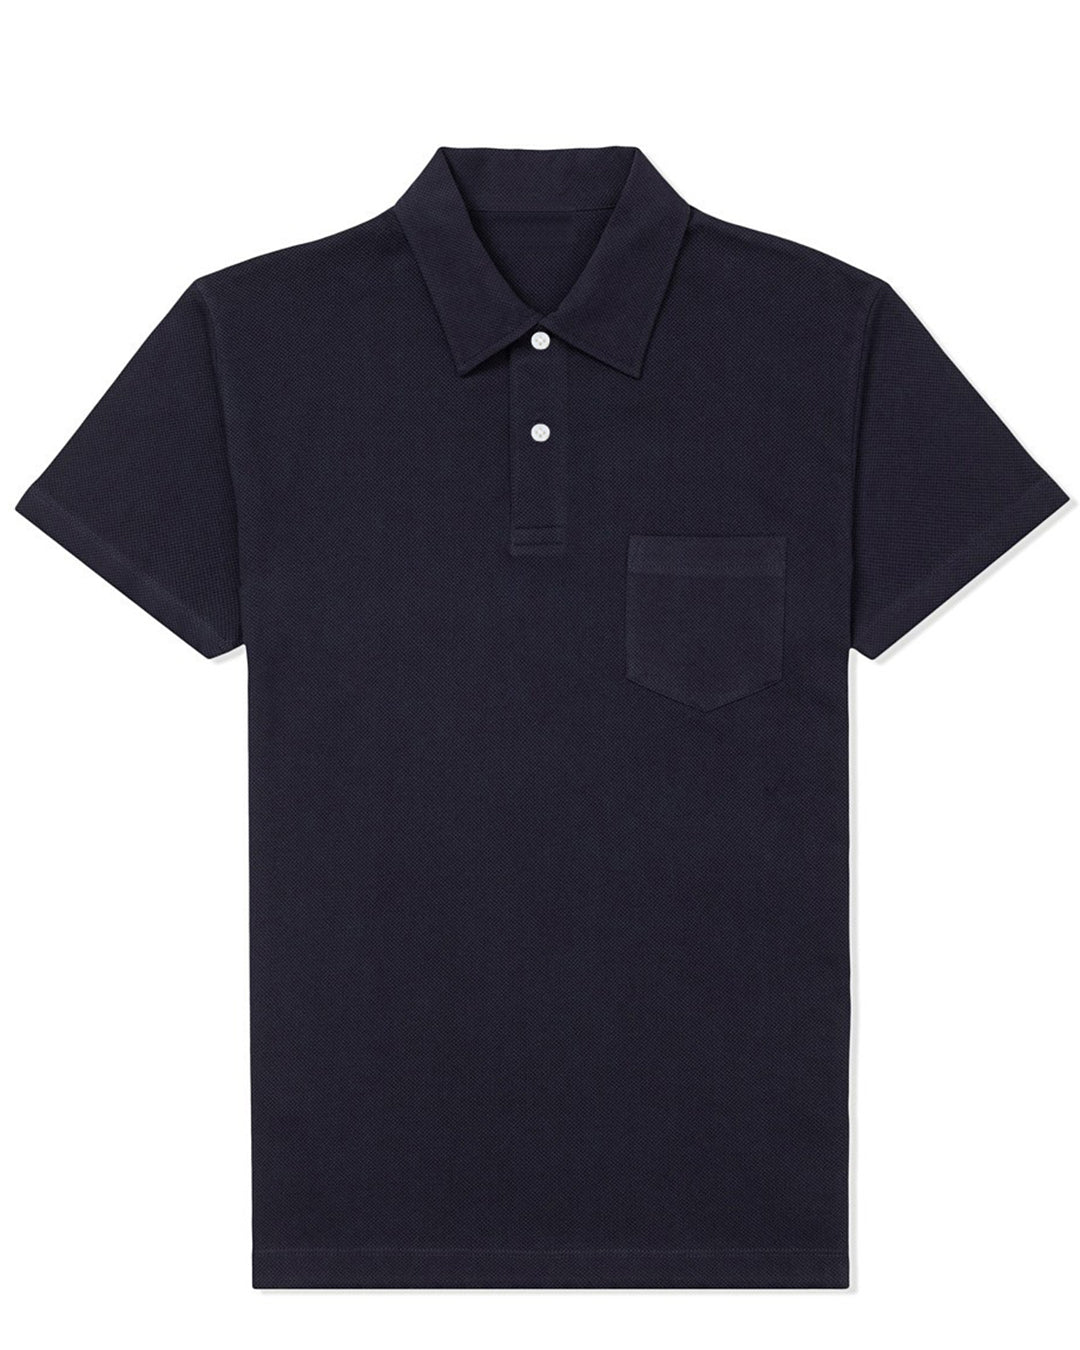 Front of the custom oxford polo shirt for men by Luxire in midnight blue